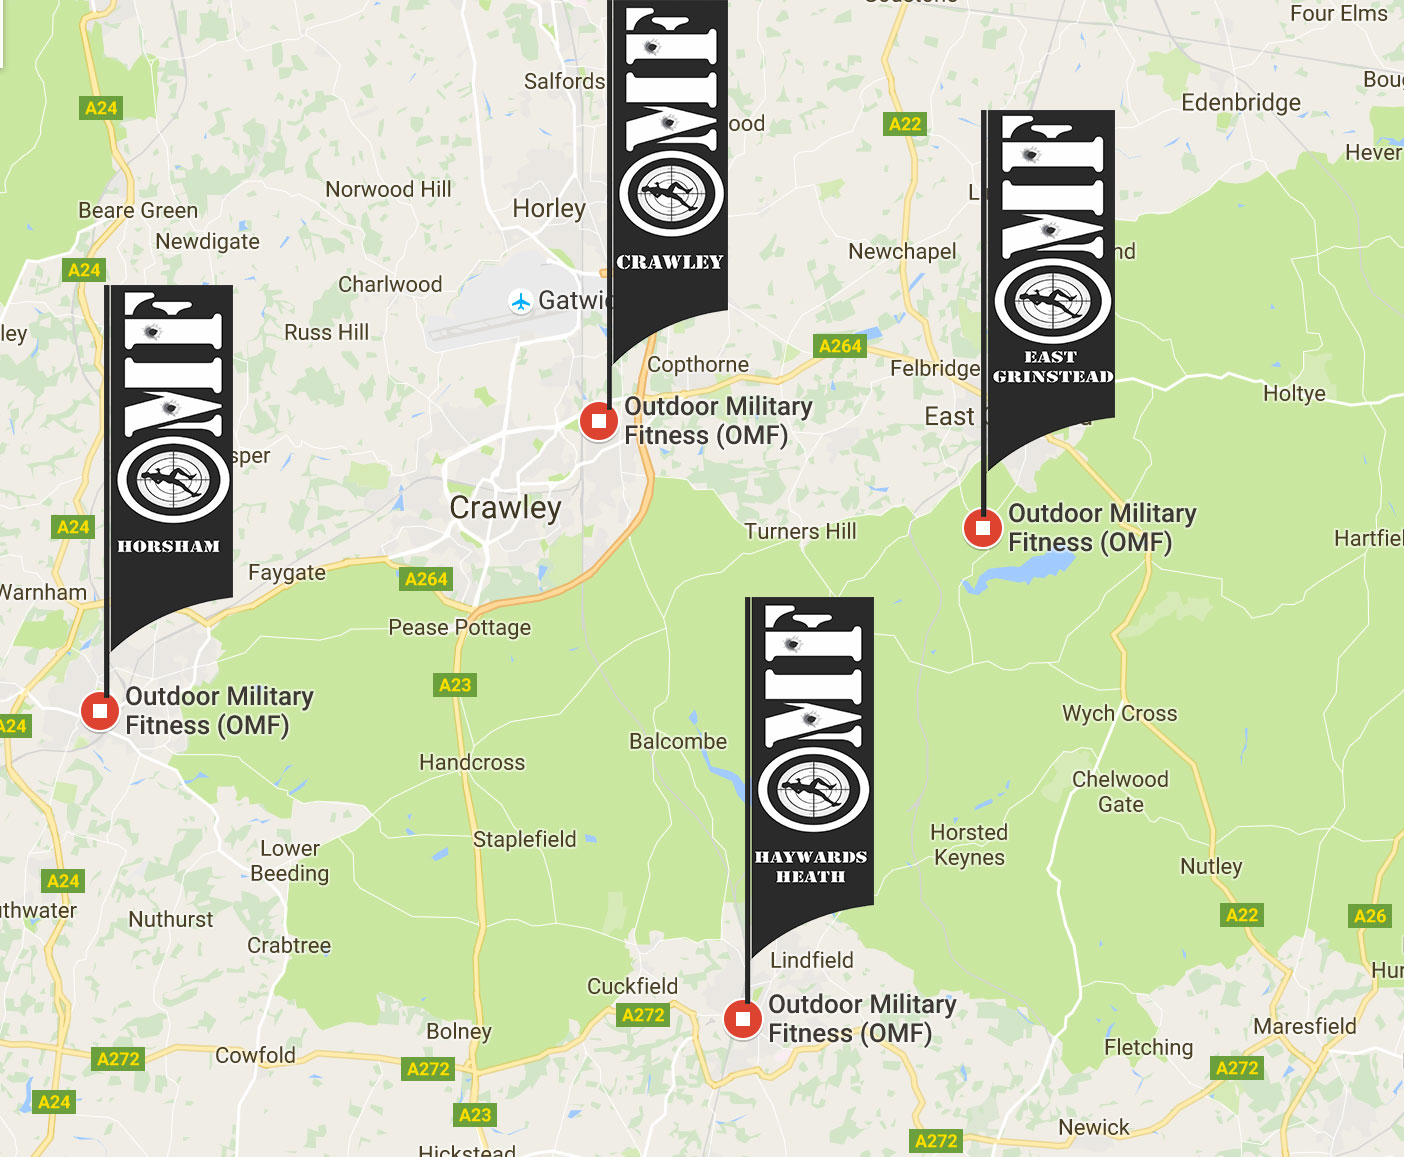 4 locations across West Sussex